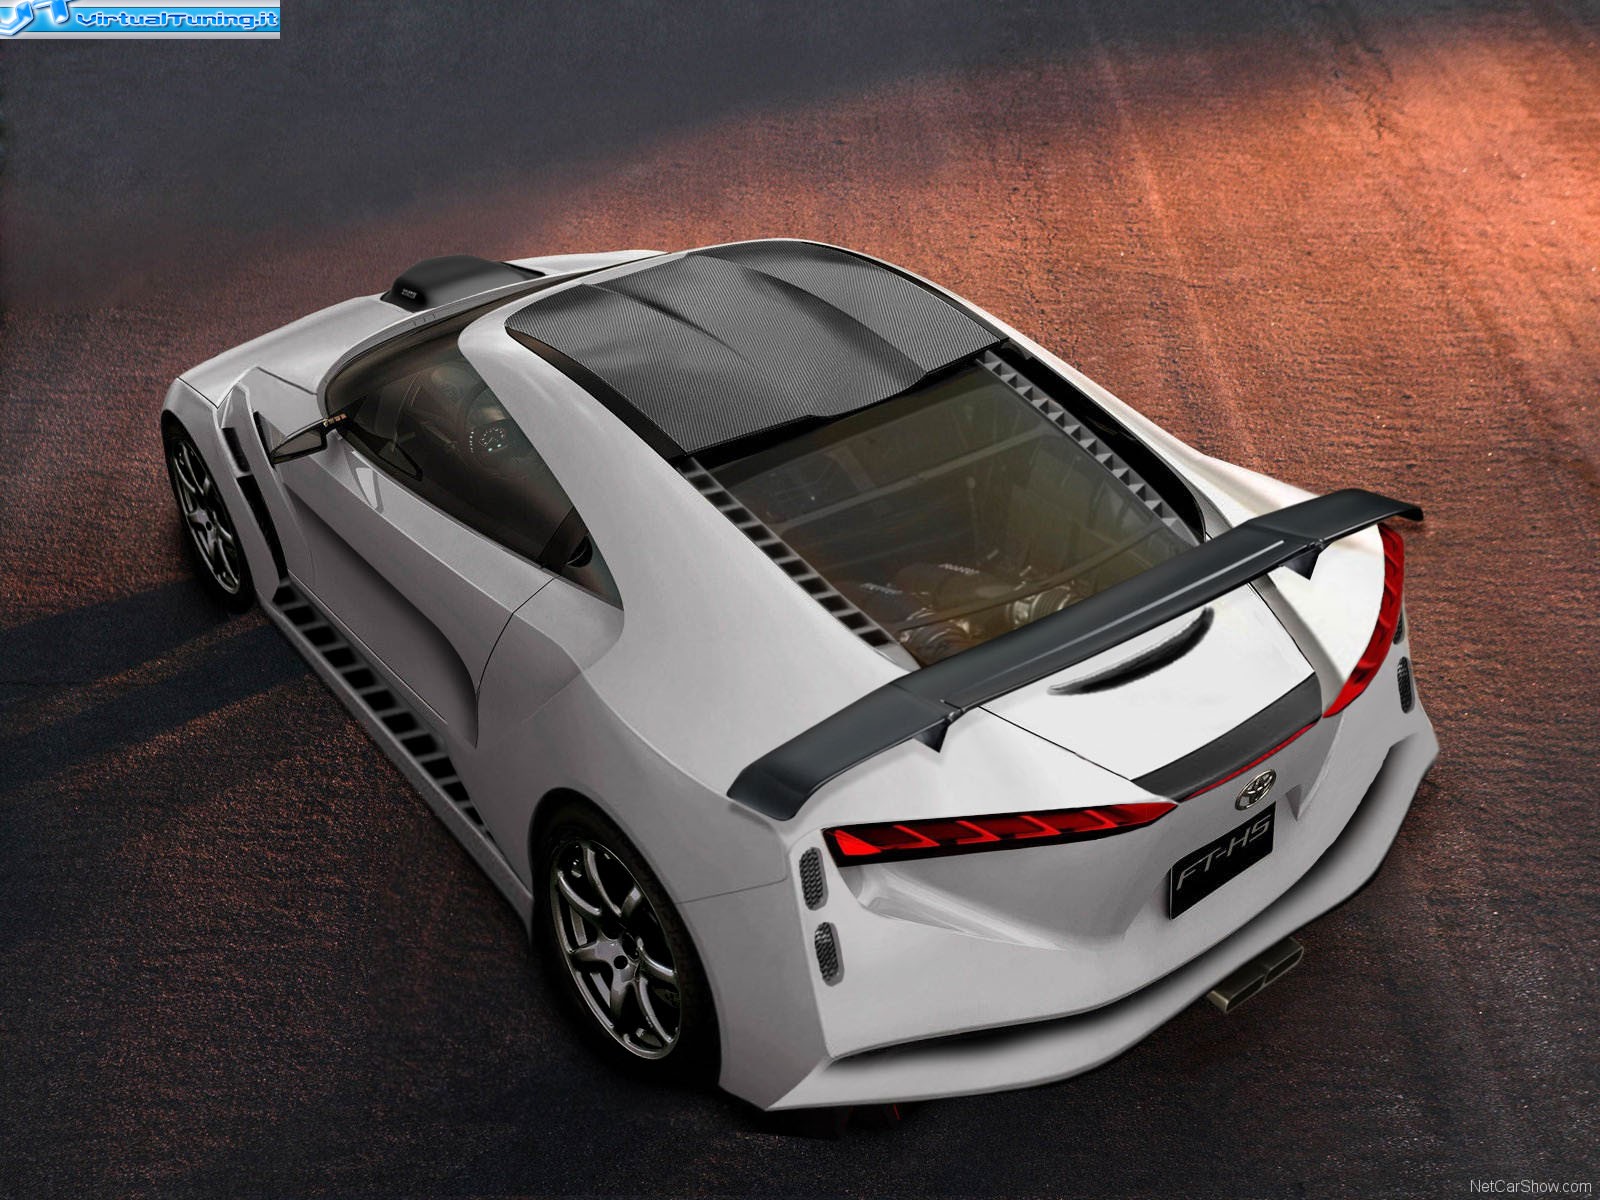 VirtualTuning TOYOTA FT-HS concept by Horsepower